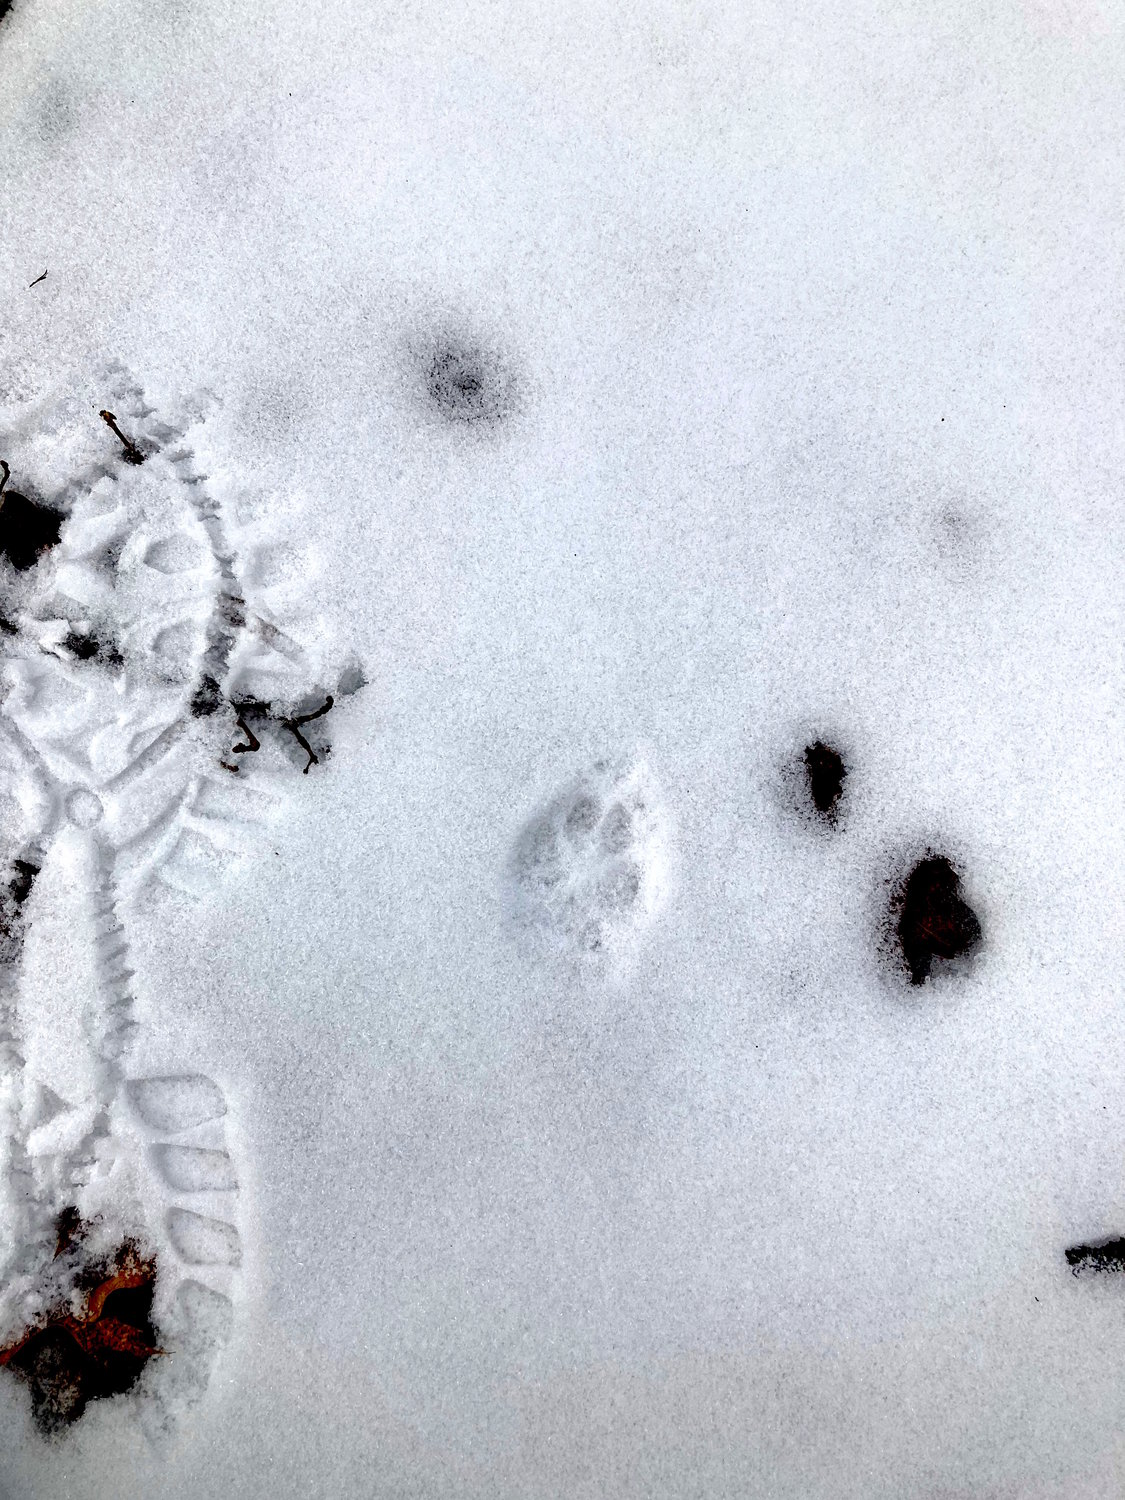 In a pinch, you can use your own footprint to establish a reference for the size of an animal track you’ve found.